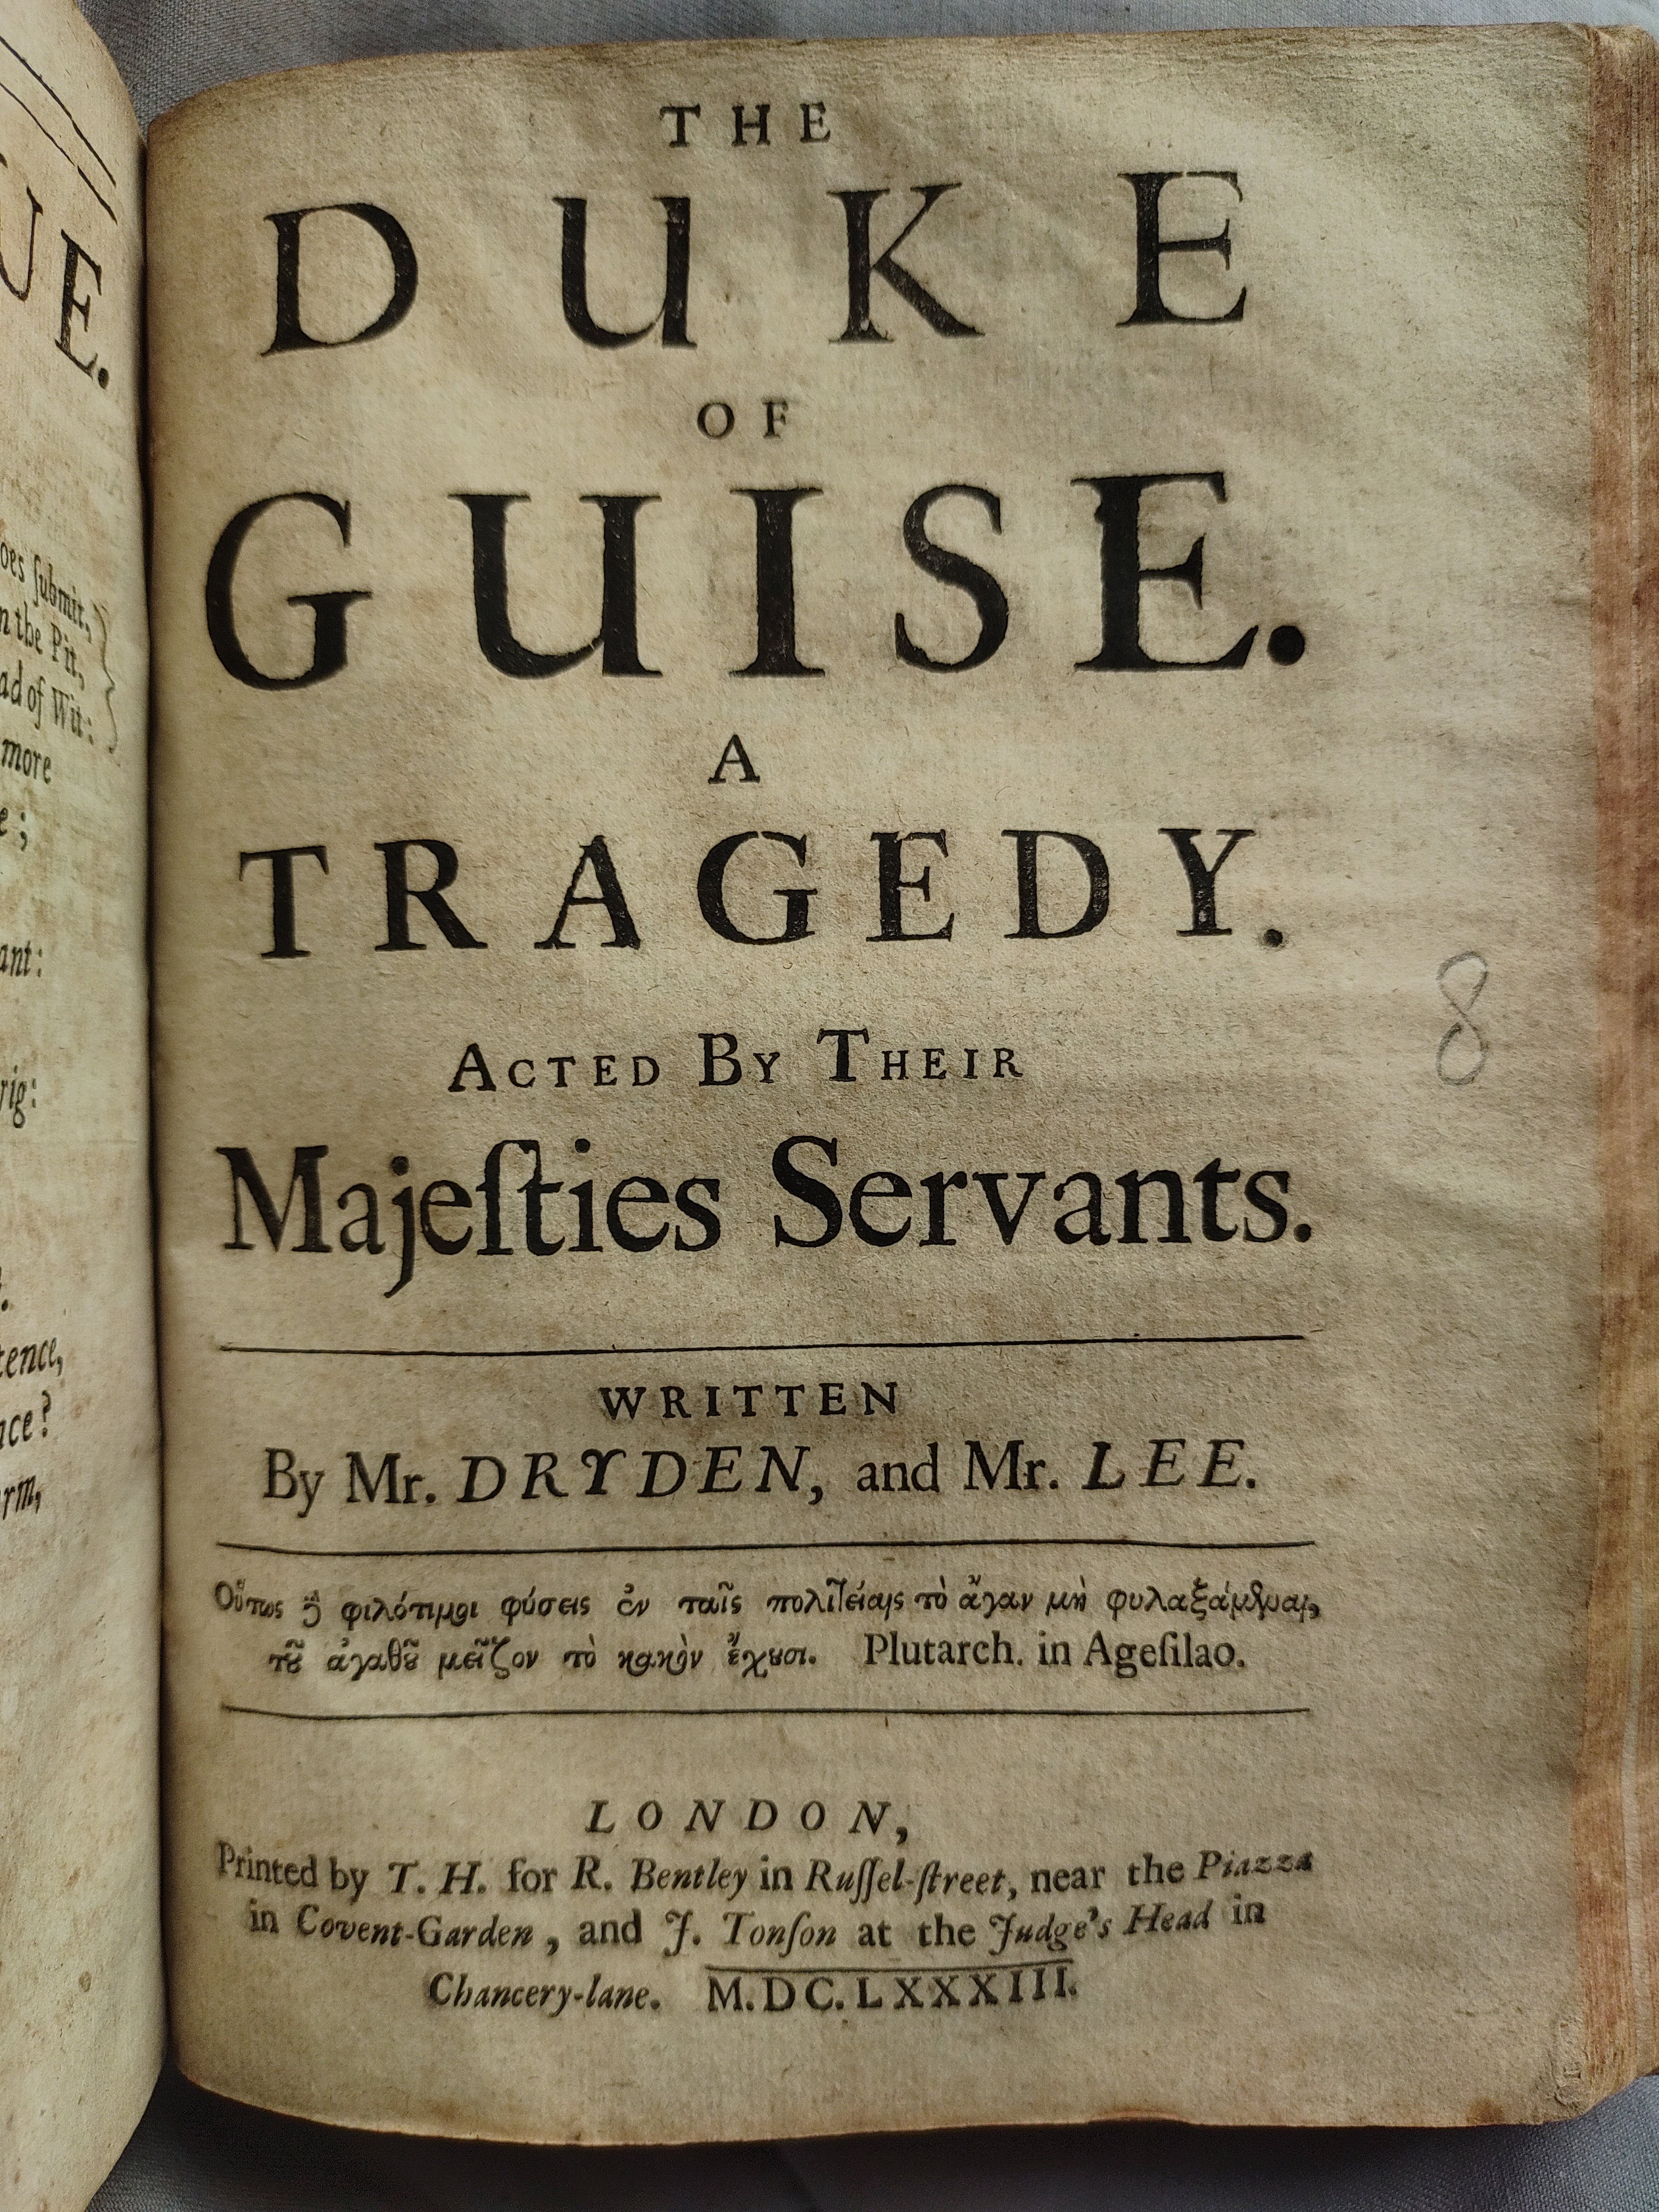 Title page of the 'Duke of Guise: A Tragedy'